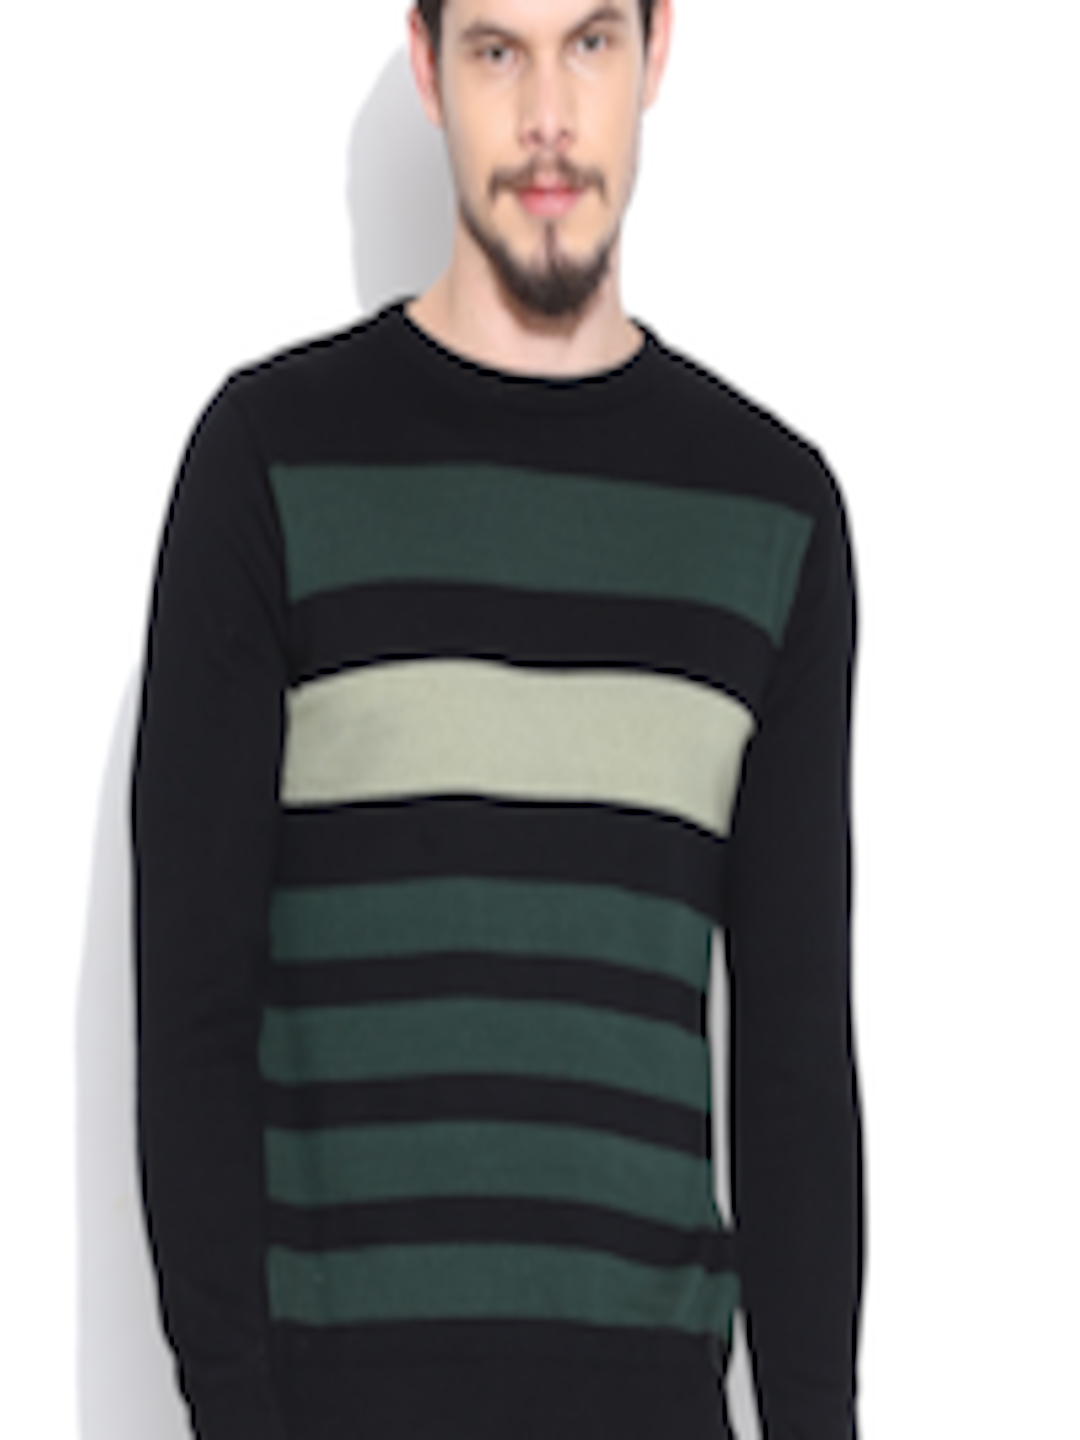 Buy Pepe Jeans Black & Green Striped Sweater - Sweaters for Men 1006212 ...